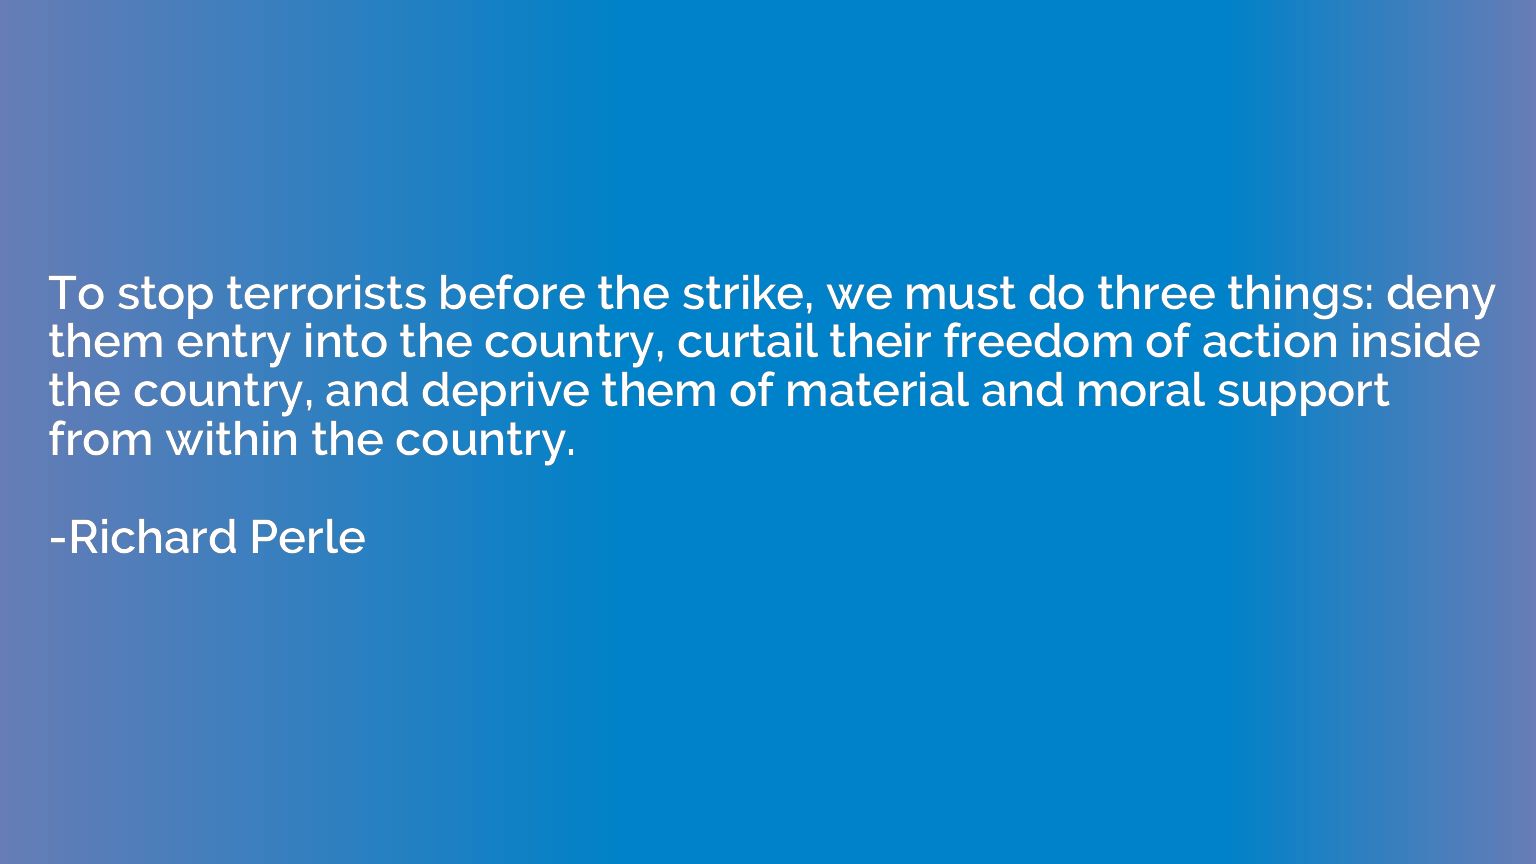 To stop terrorists before the strike, we must do three thing